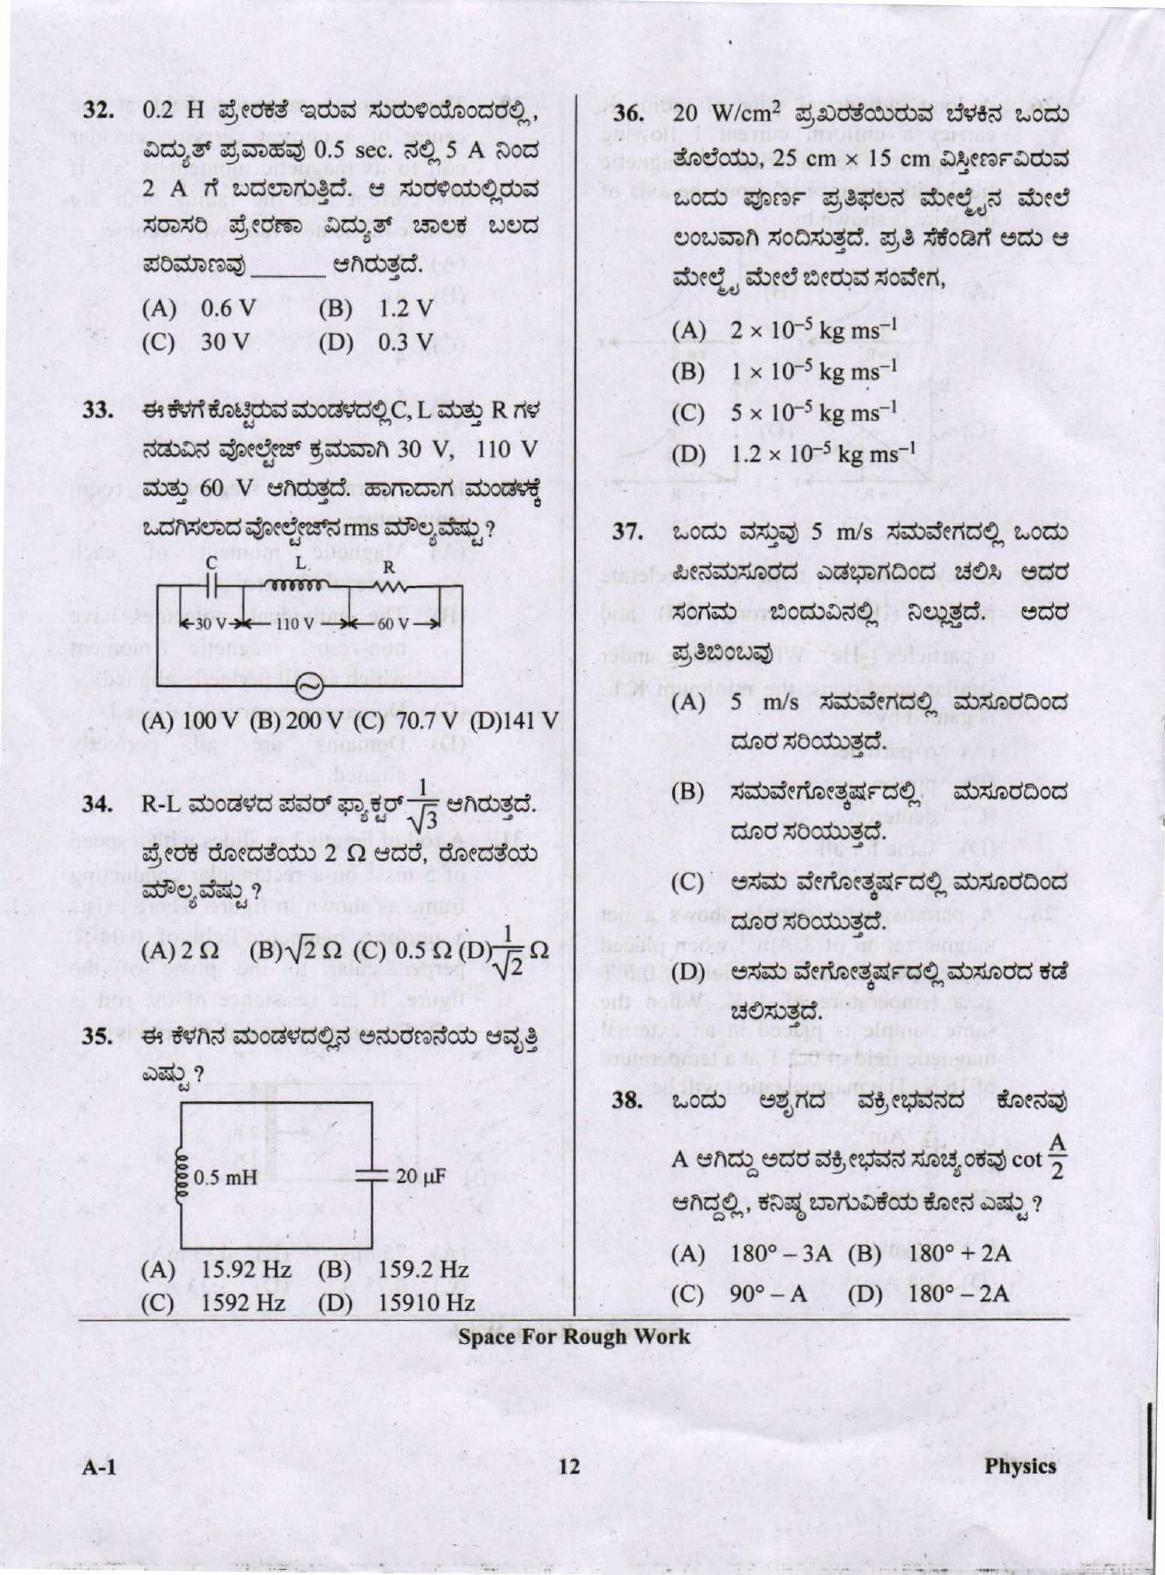 KCET Physics 2020 Question Papers - Page 12